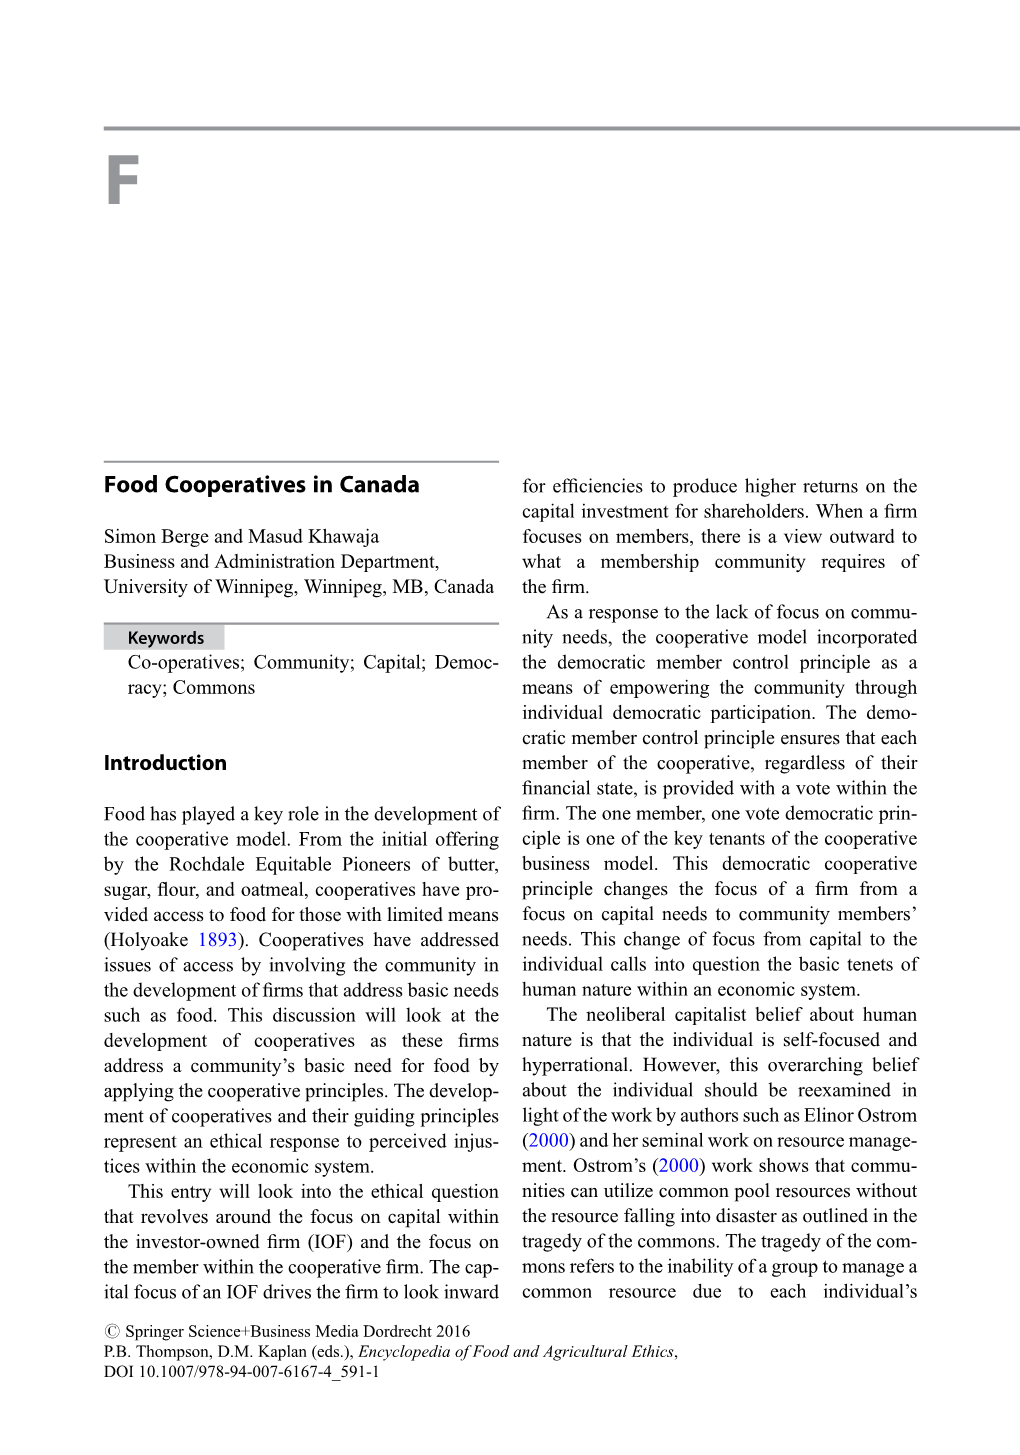 Food Cooperatives in Canada for Efﬁciencies to Produce Higher Returns on the Capital Investment for Shareholders